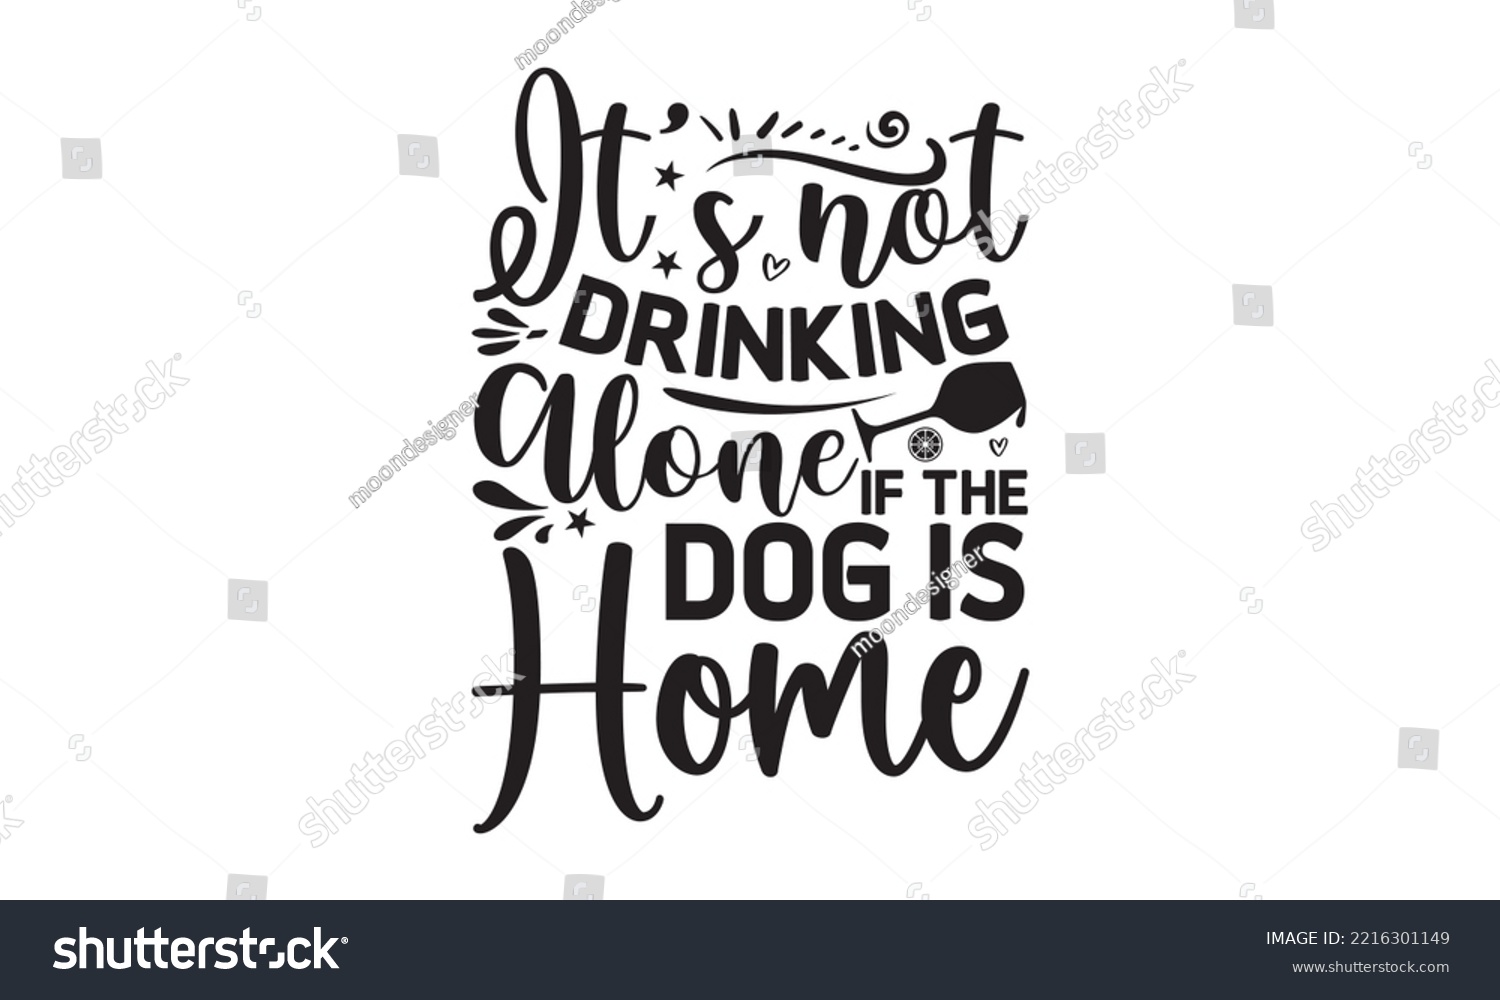 SVG of It’s not drinking alone if the dog is home - Alcohol SVG T Shirt design, Girl Beer Design, Prost, Pretzels and Beer, Vector EPS Editable Files, Alcohol funny quotes, Oktoberfest Alcohol SVG design svg